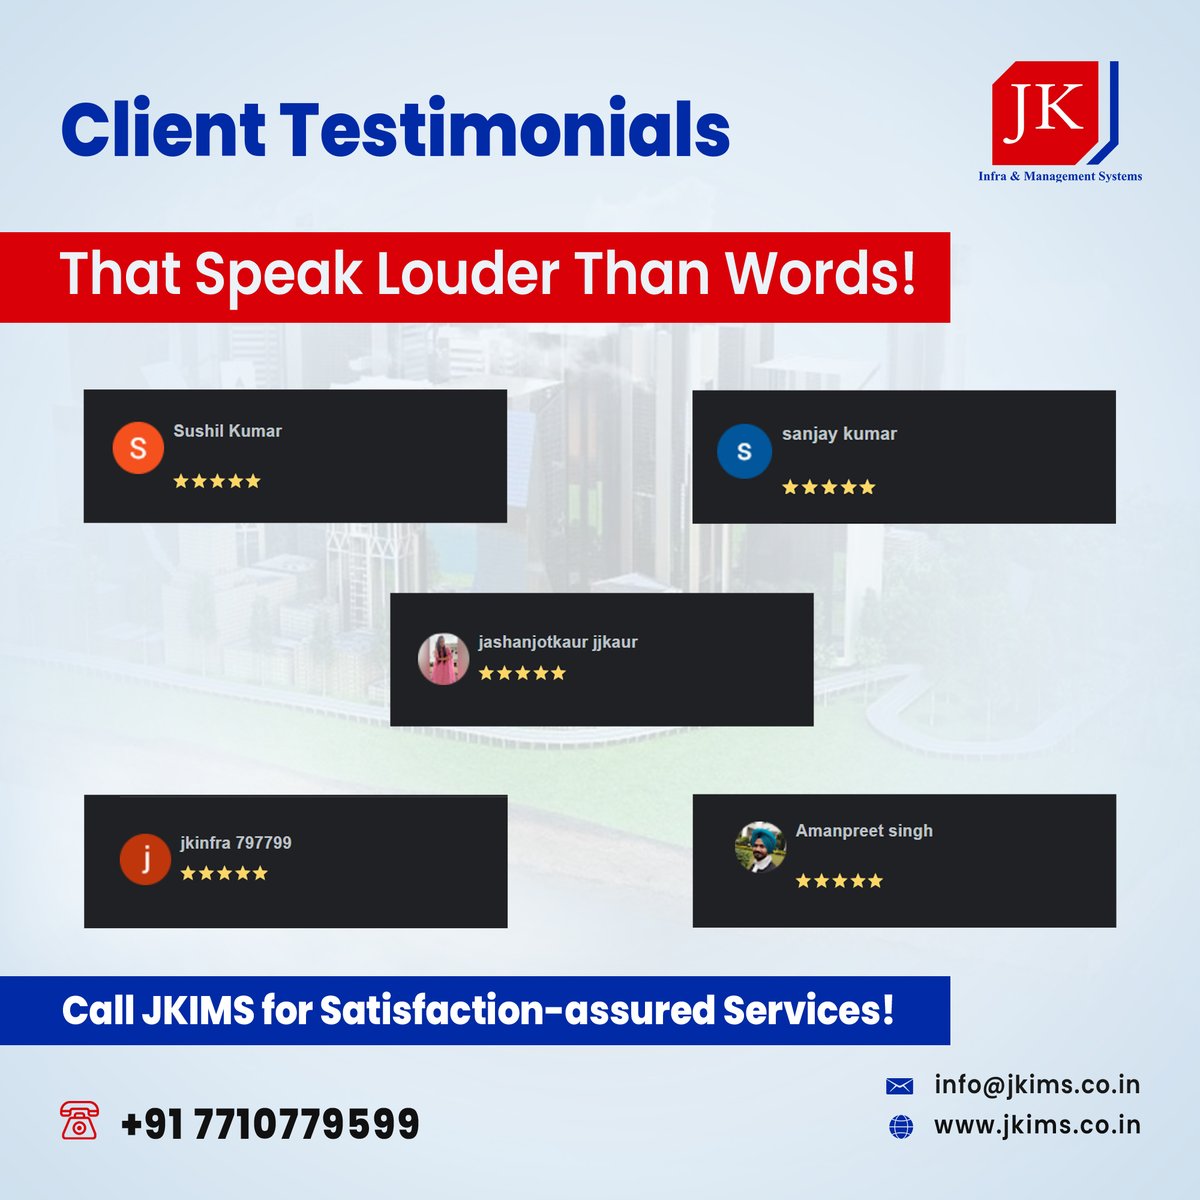 Thrilled #Clients, #HappyHomes! 
#JKIMS' excellence shown in the Words of Those We Serve! Discover the Excellence, Read Our #ClientsStories. Call now for the #bestpropertymanagementservices in the tricity! 
Call now: +91 7710779599
#JKInfraAndManagementSystem #bestproperty